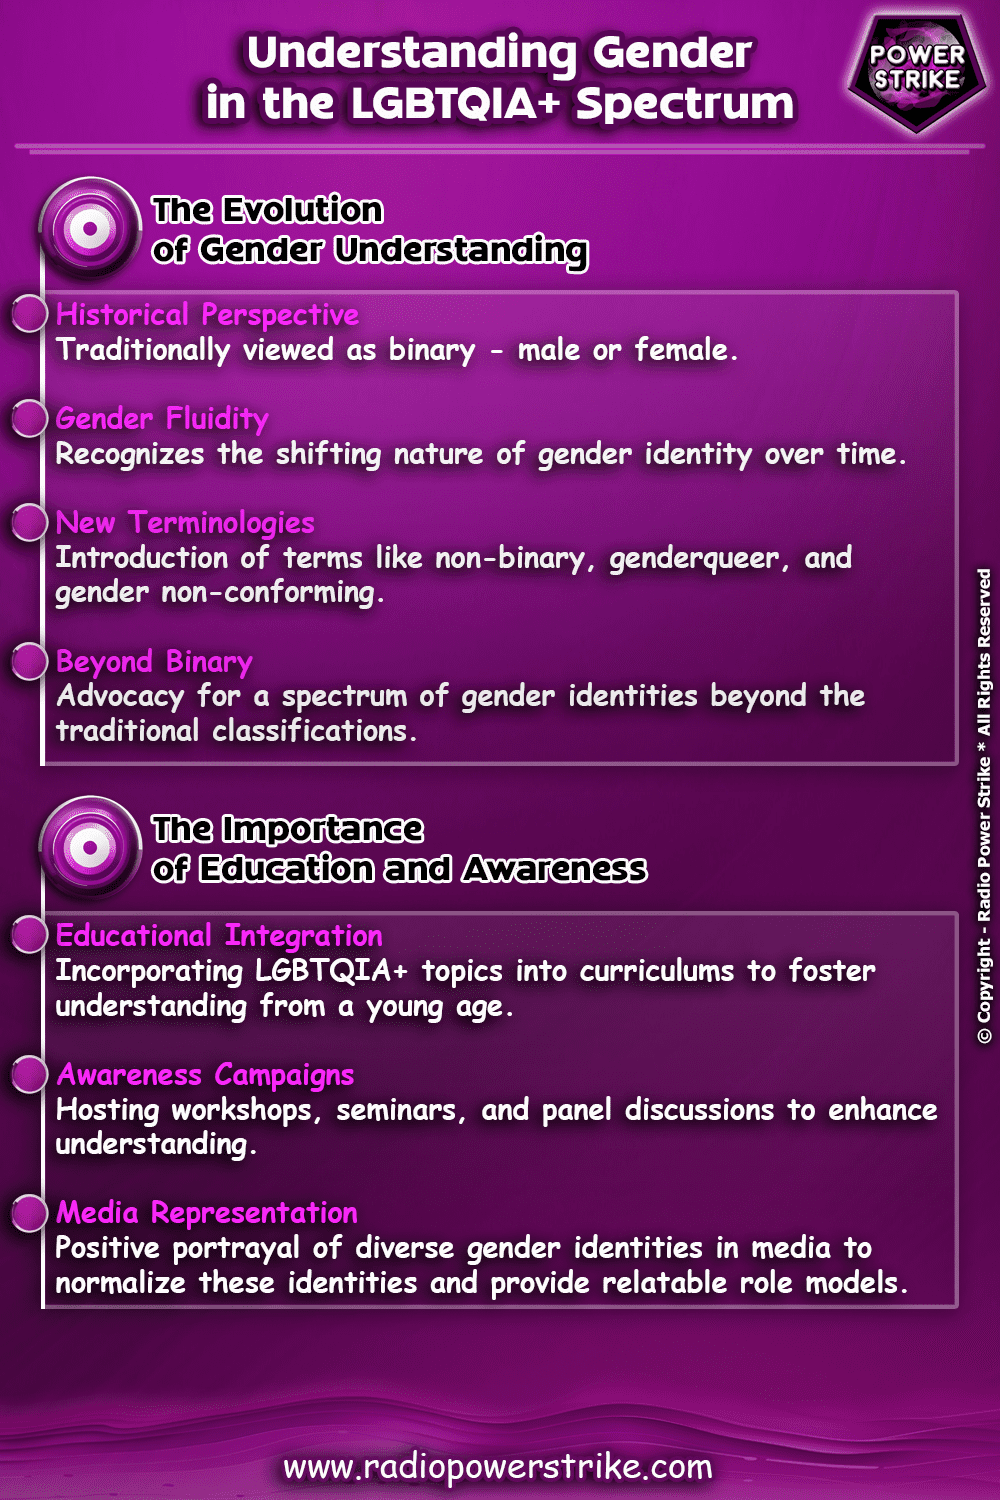 Infographic illustrating the evolution of gender understanding, the importance of education and awareness, and the challenges and path forward in embracing gender fluidity within the LGBTQIA+ spectrum.